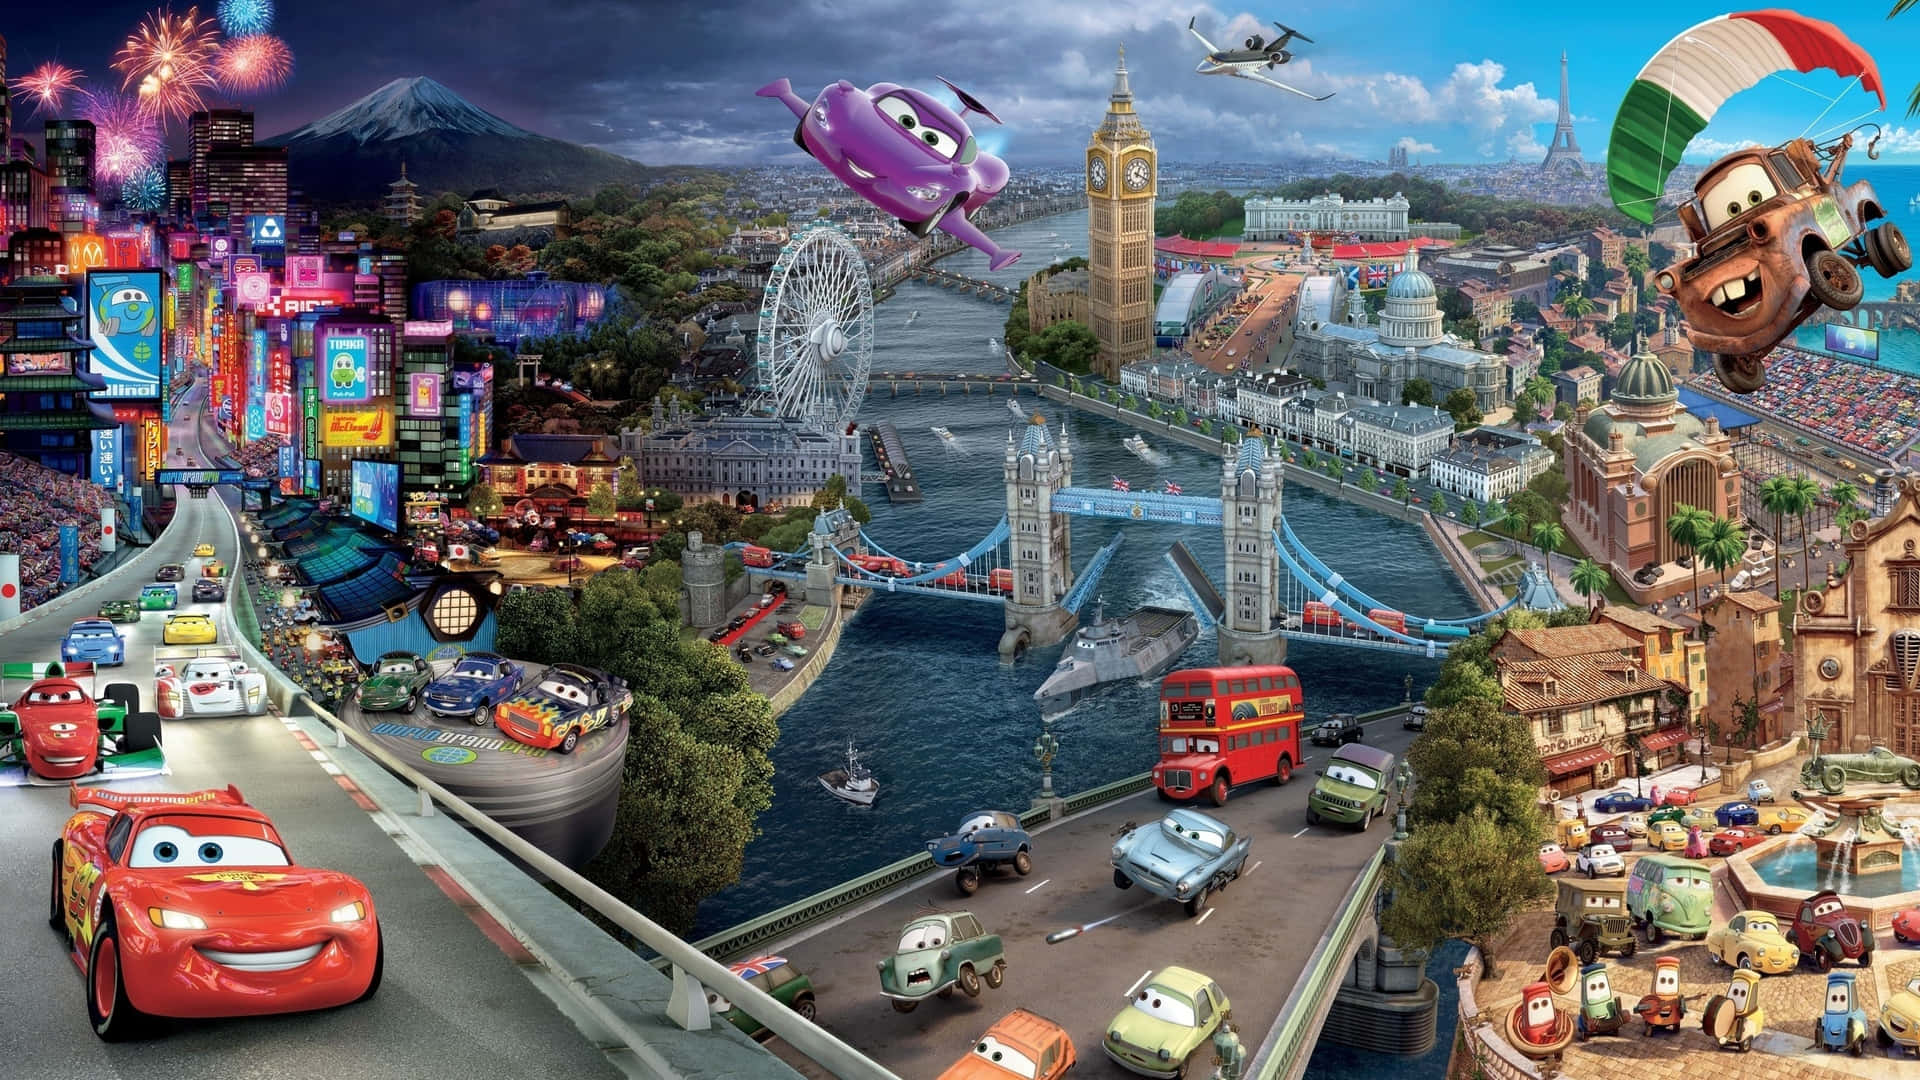 Disney Cars - A City With Many Cars Flying Around